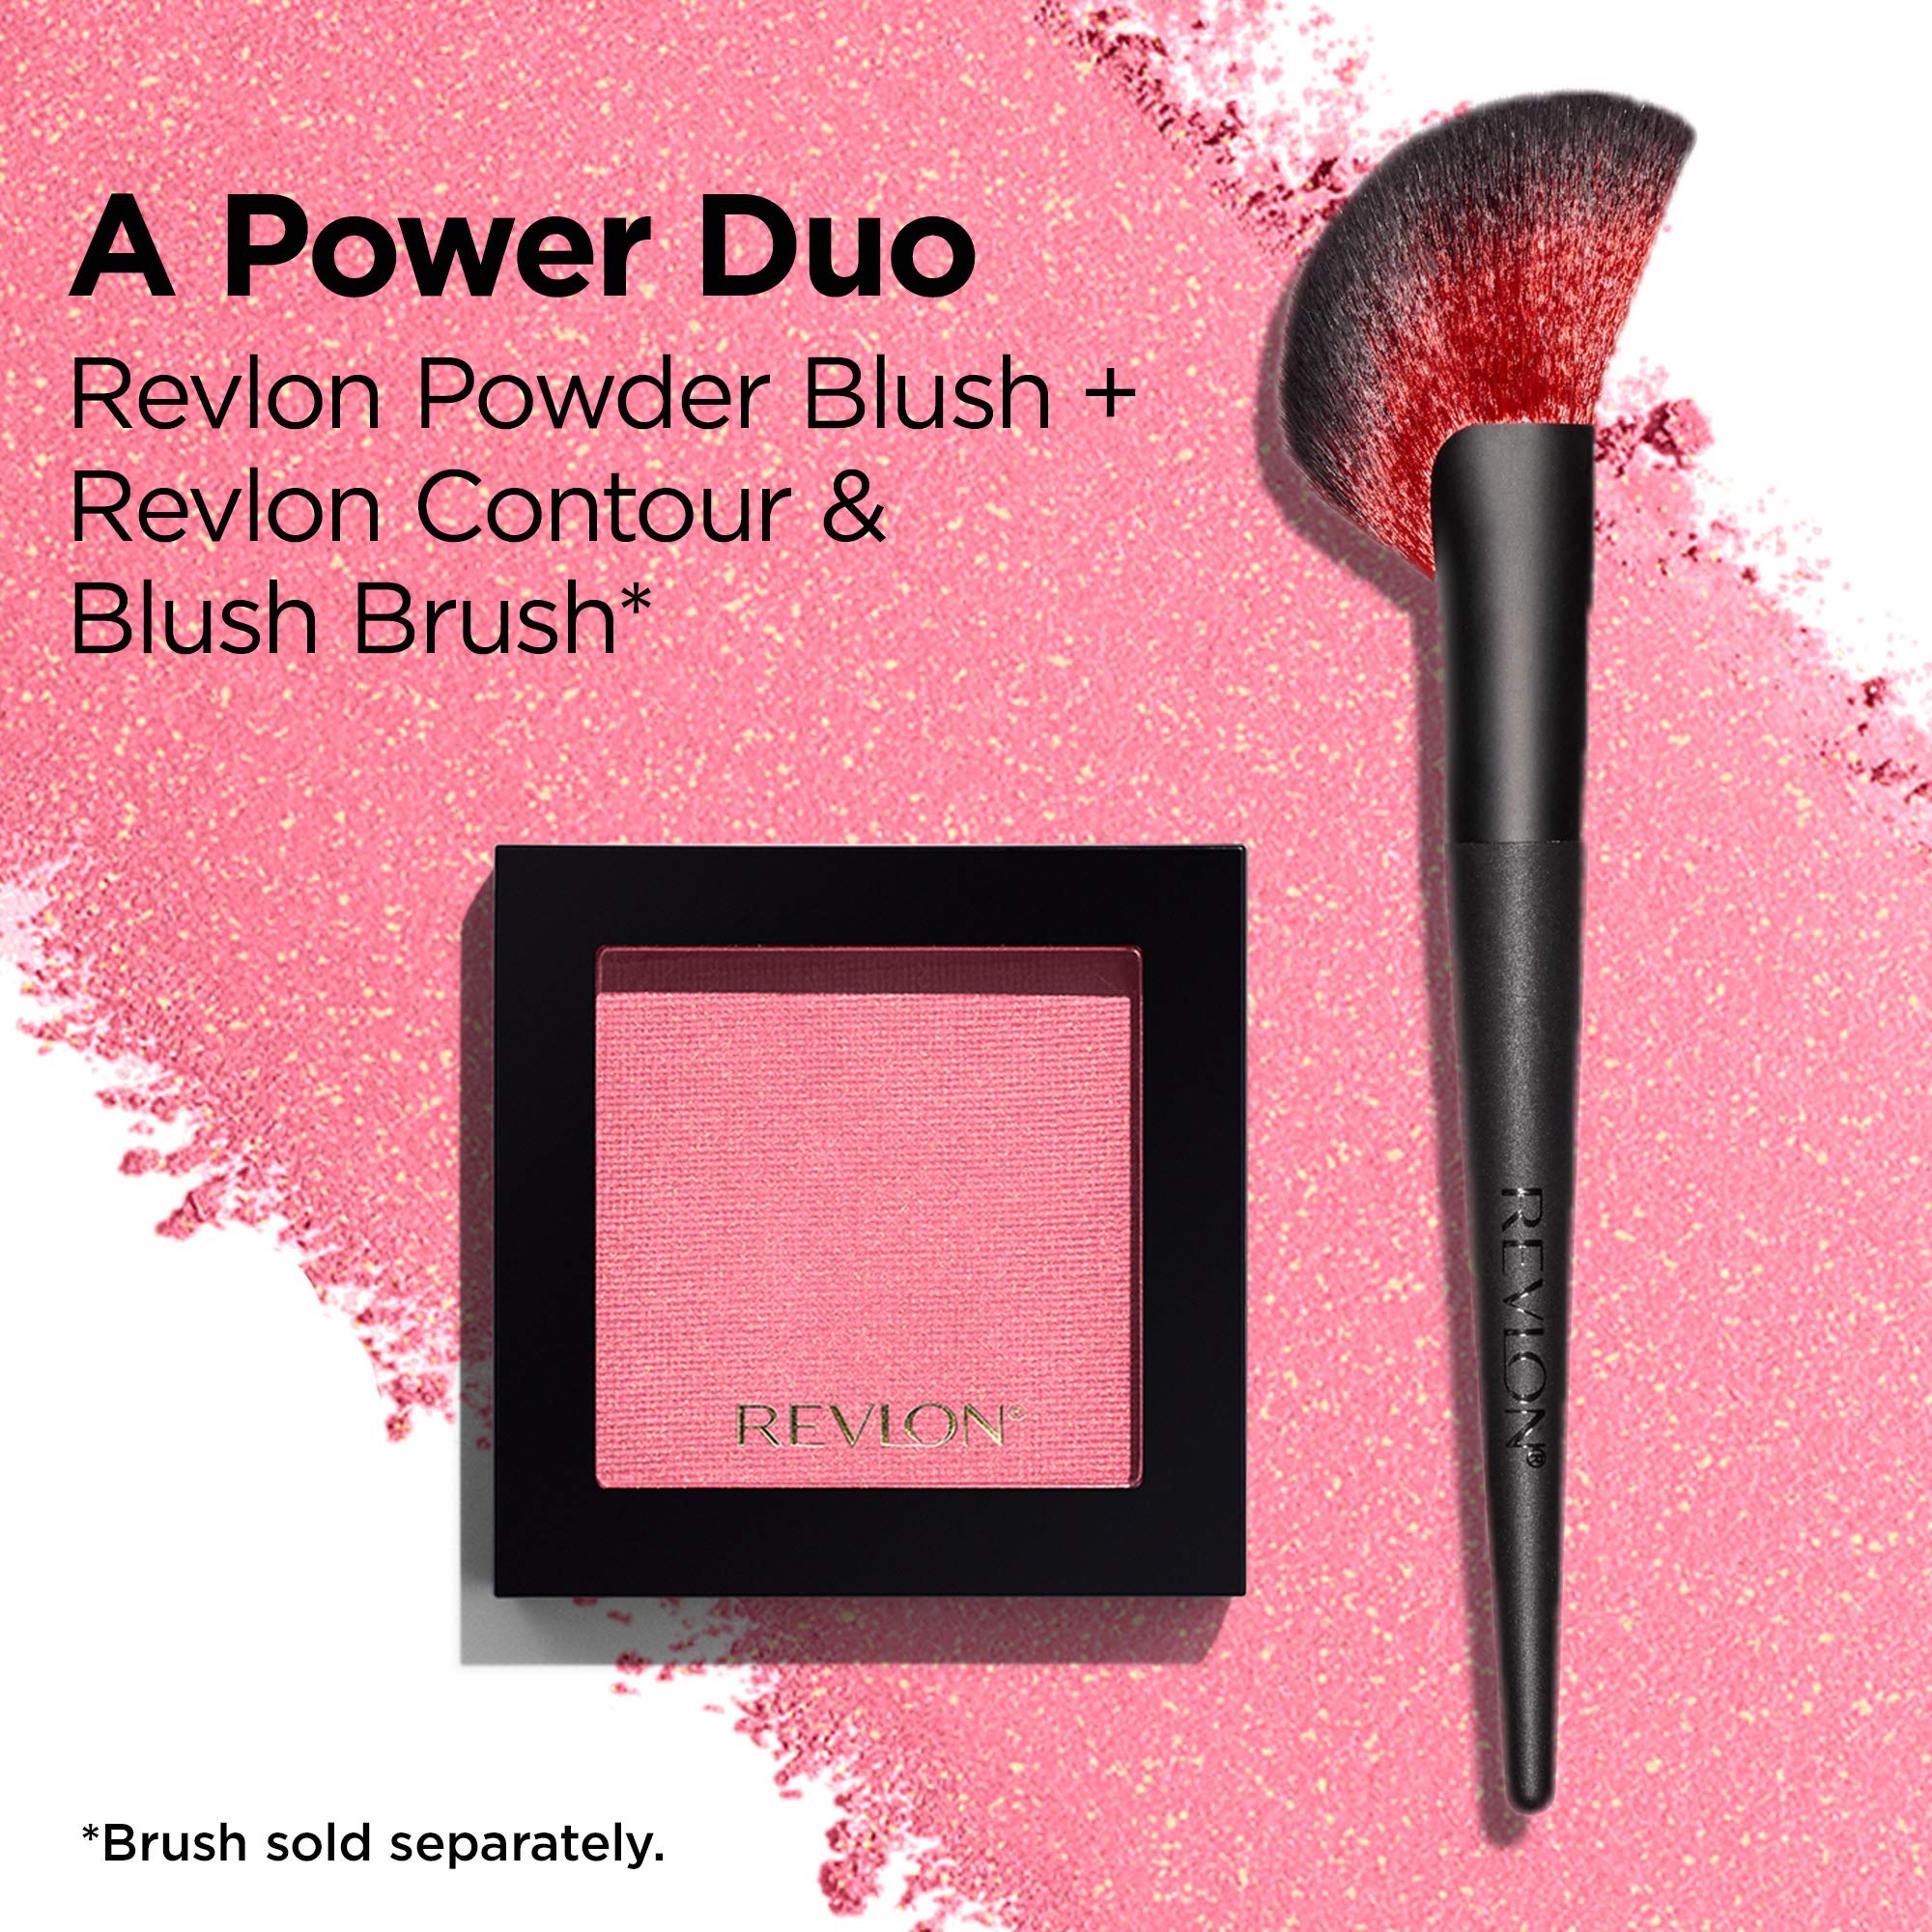 Blush by Revlon, Powder Blush Face Makeup, High Impact Buildable Color, Lightweight & Smooth Finish, 001 Oh Baby! Pink, 0.17 Oz